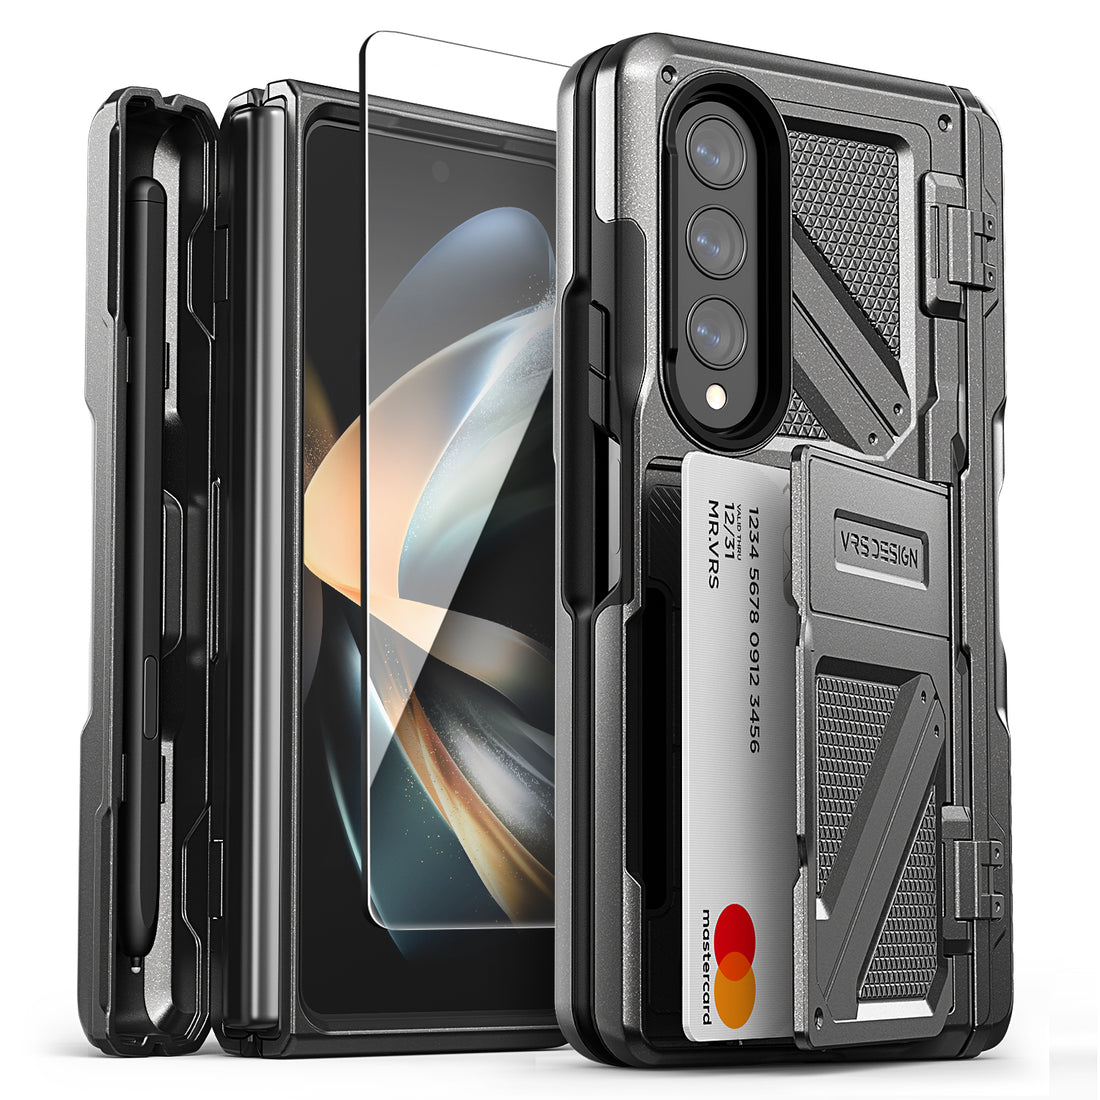 Samsung Galaxy Z Fold 4 wallet rugged case with multiple durable and convenient card slot with sleek minimalism by VRS